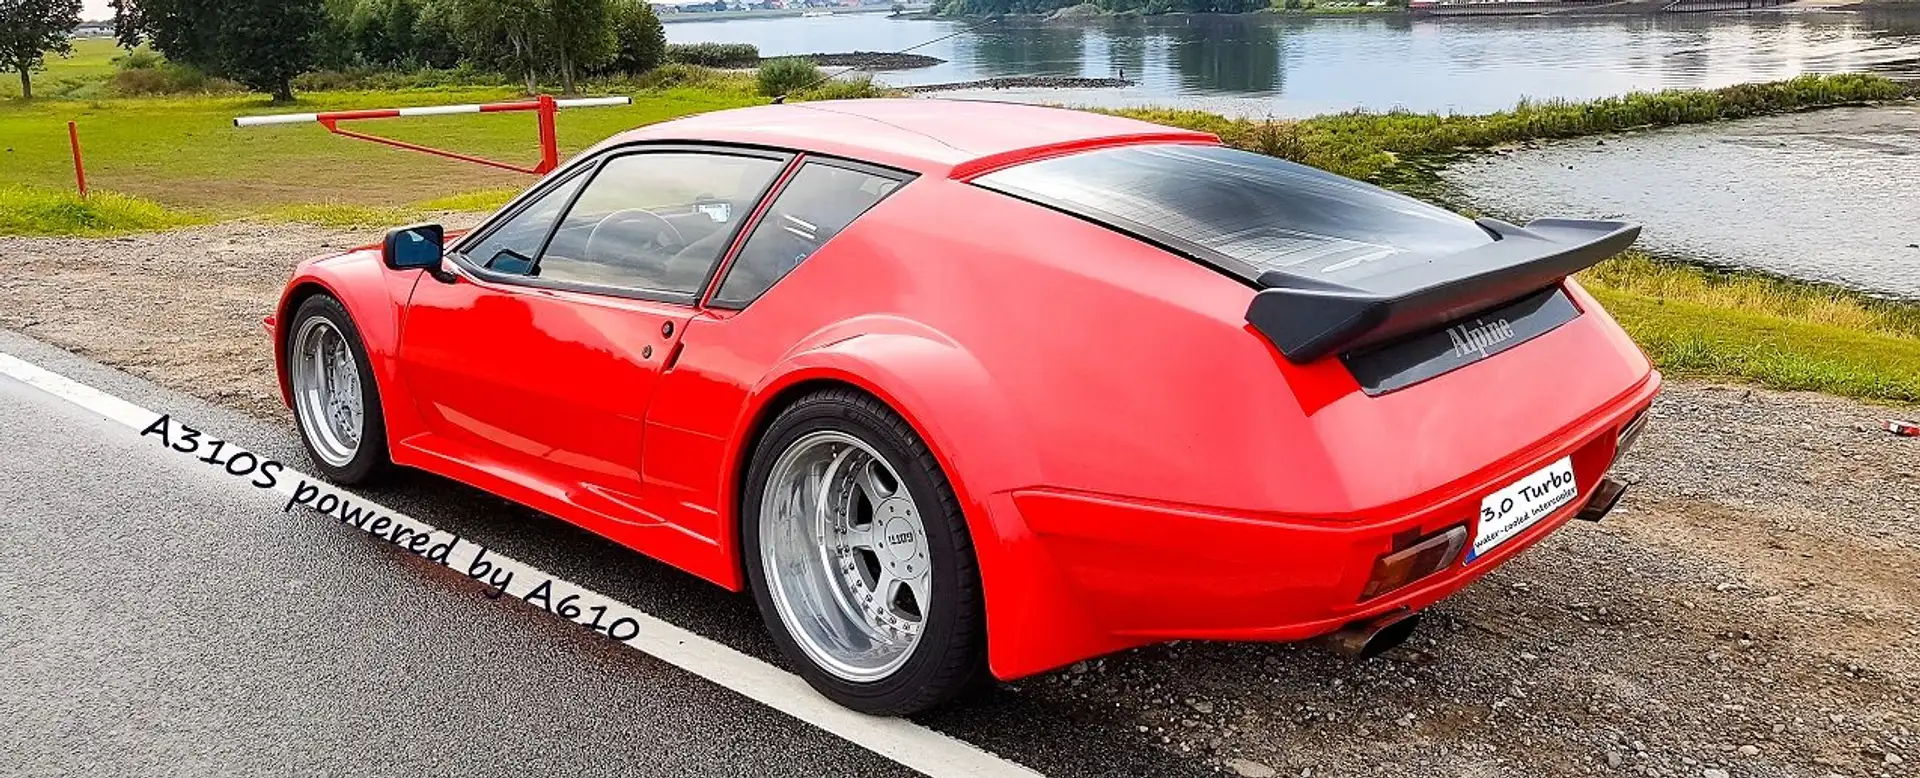 Renault Alpine A310 A310 S 3,0 Turbo 466 NM 300PS Rouge - 2